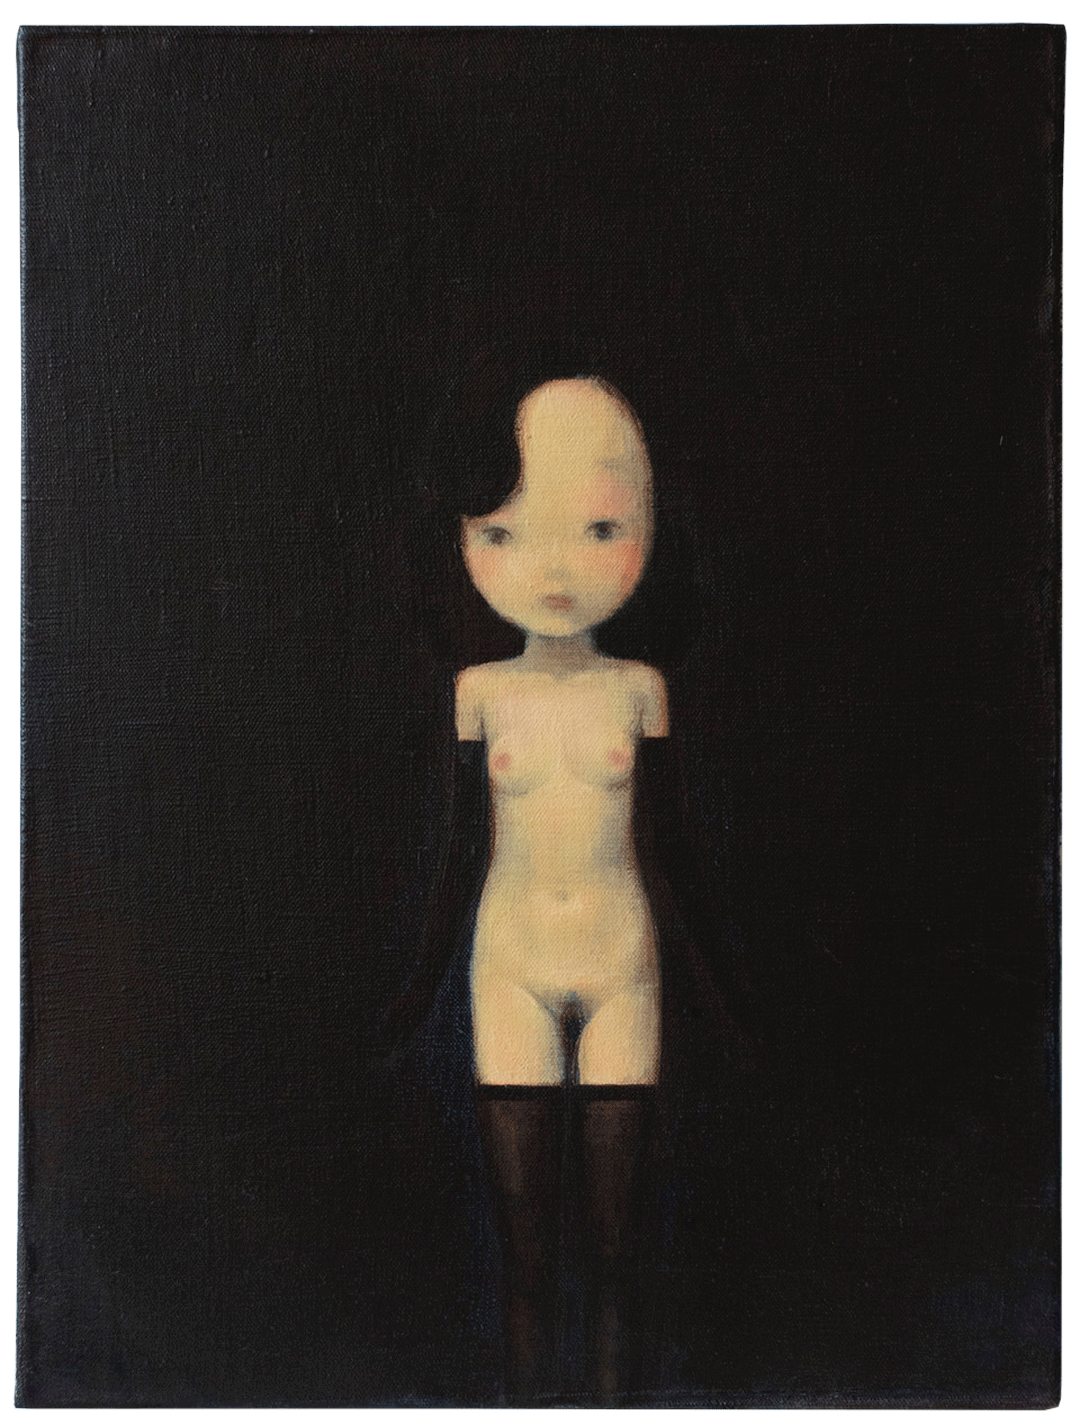 A painting by Liu Ye, titled Venus, dated 2006.